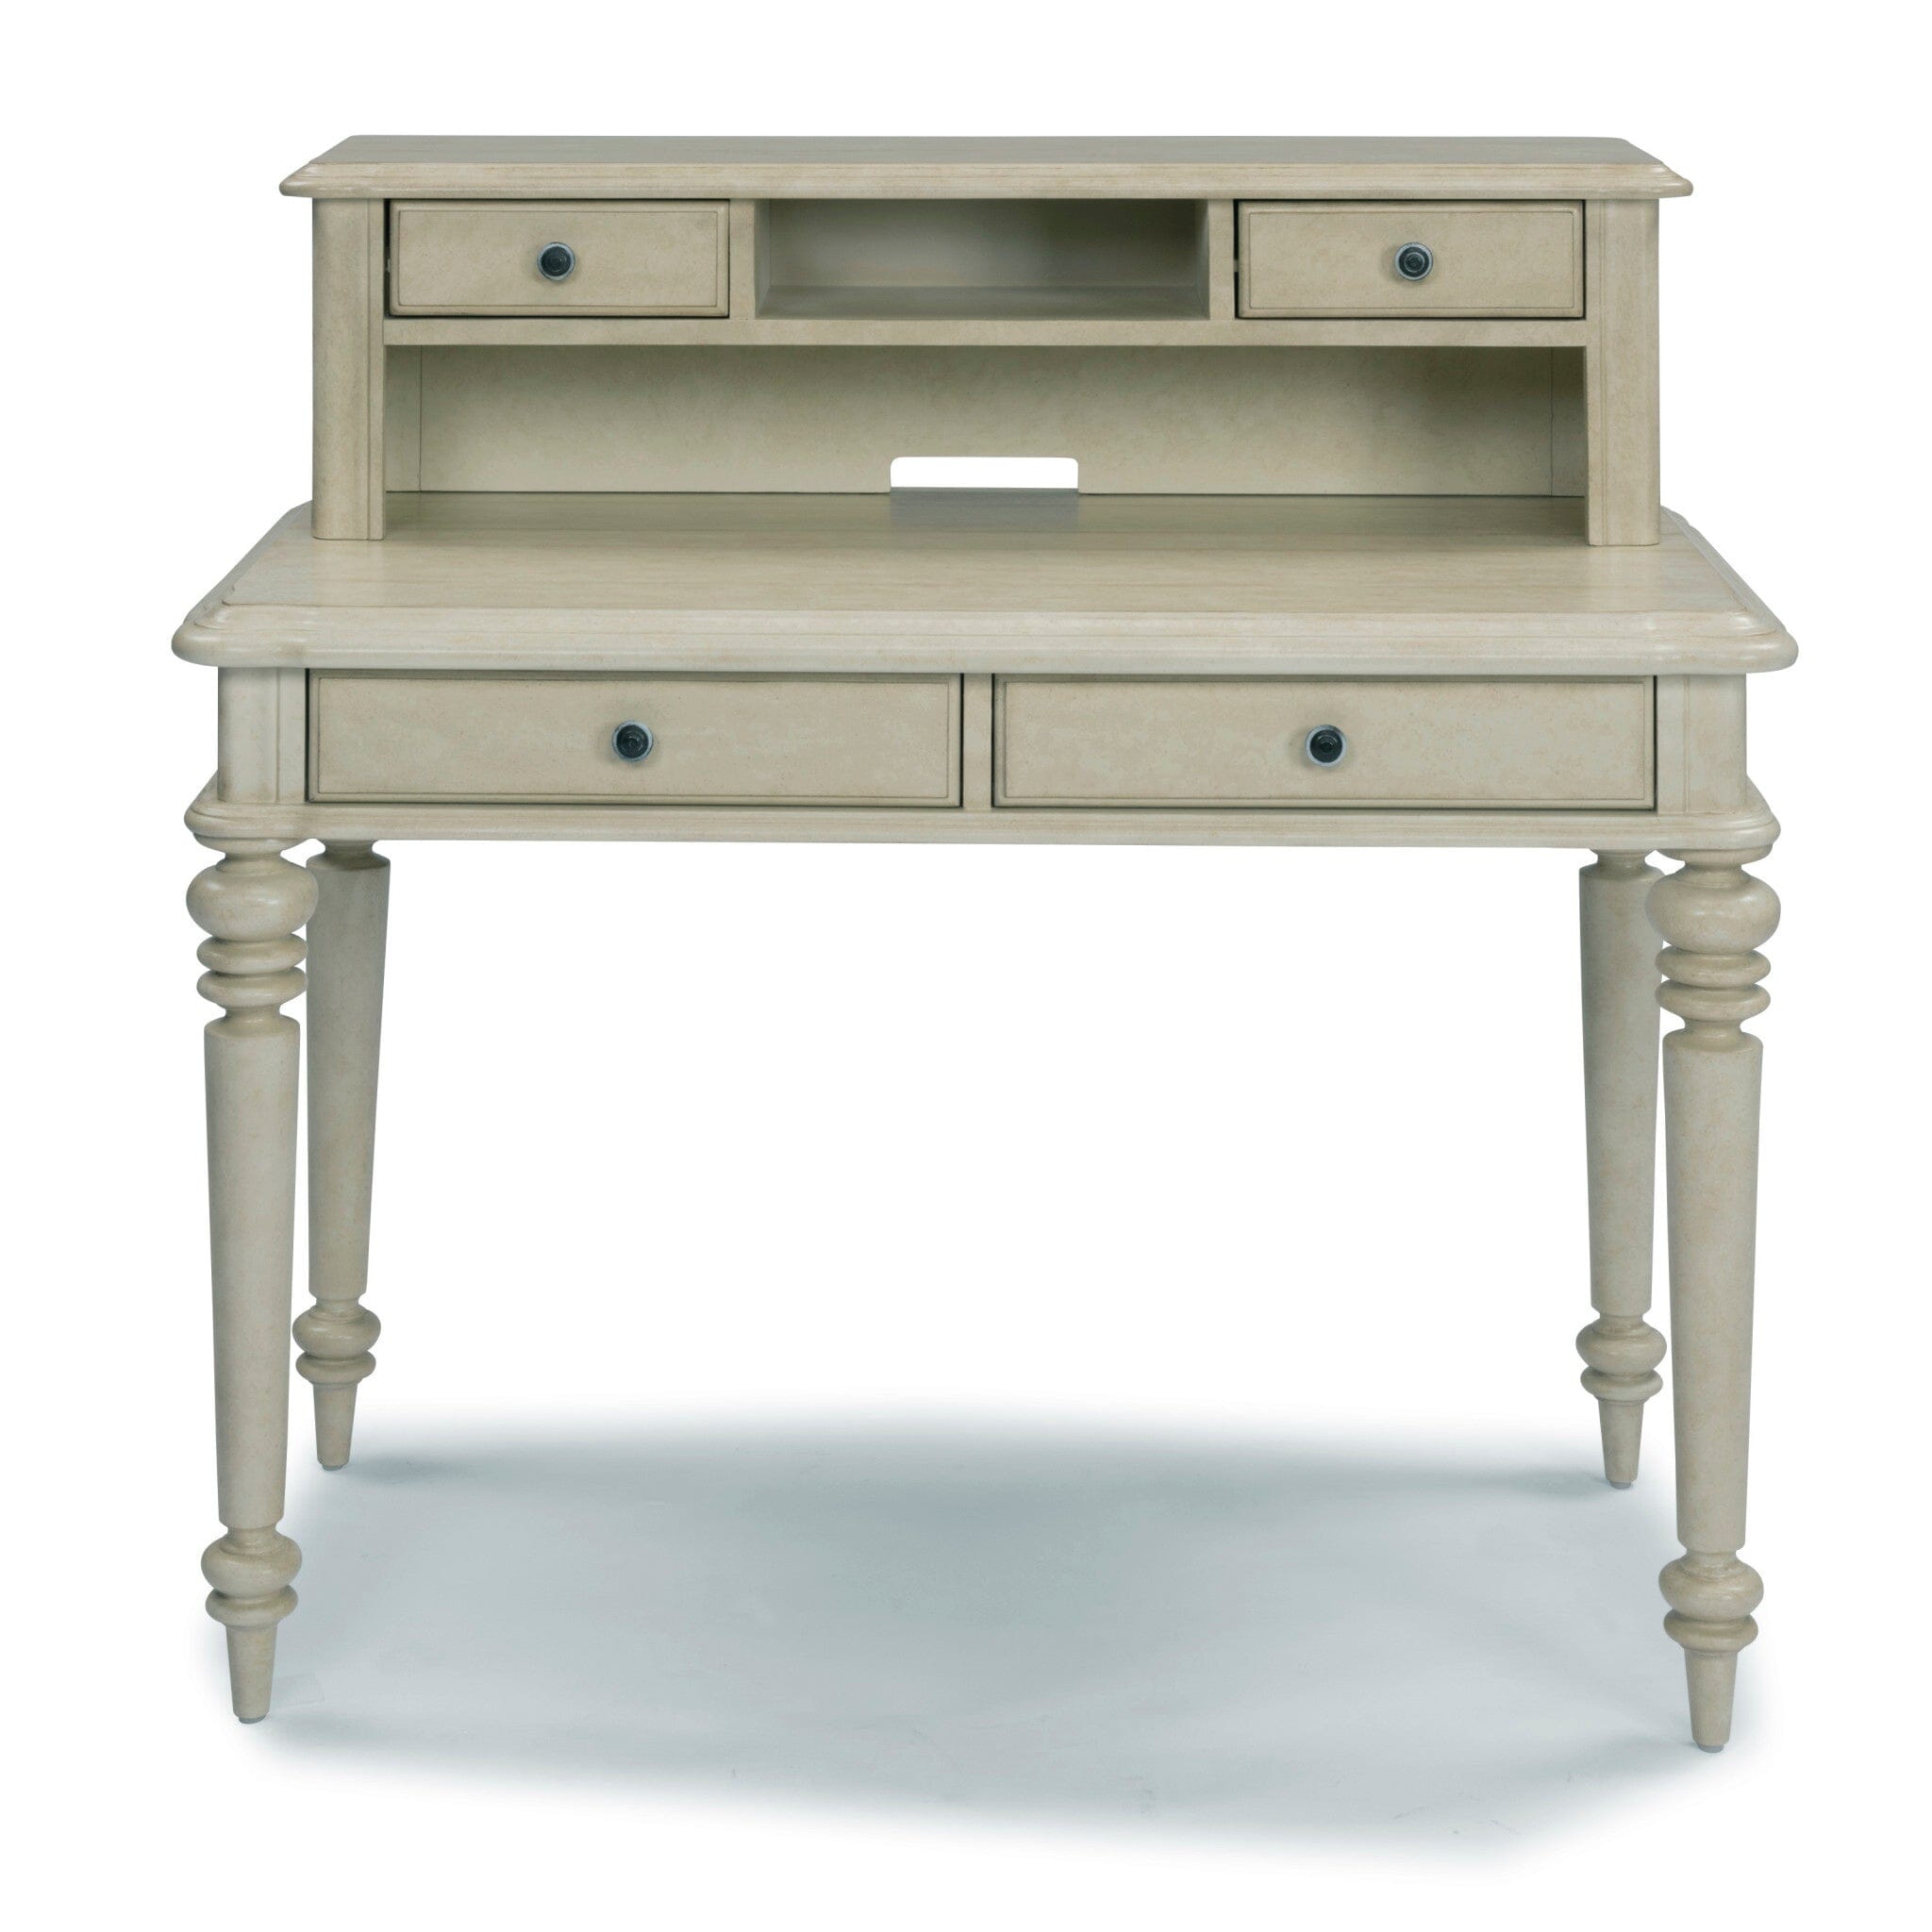 Rustic Farmhouse Desk with Hutch By Provence Desk Provence